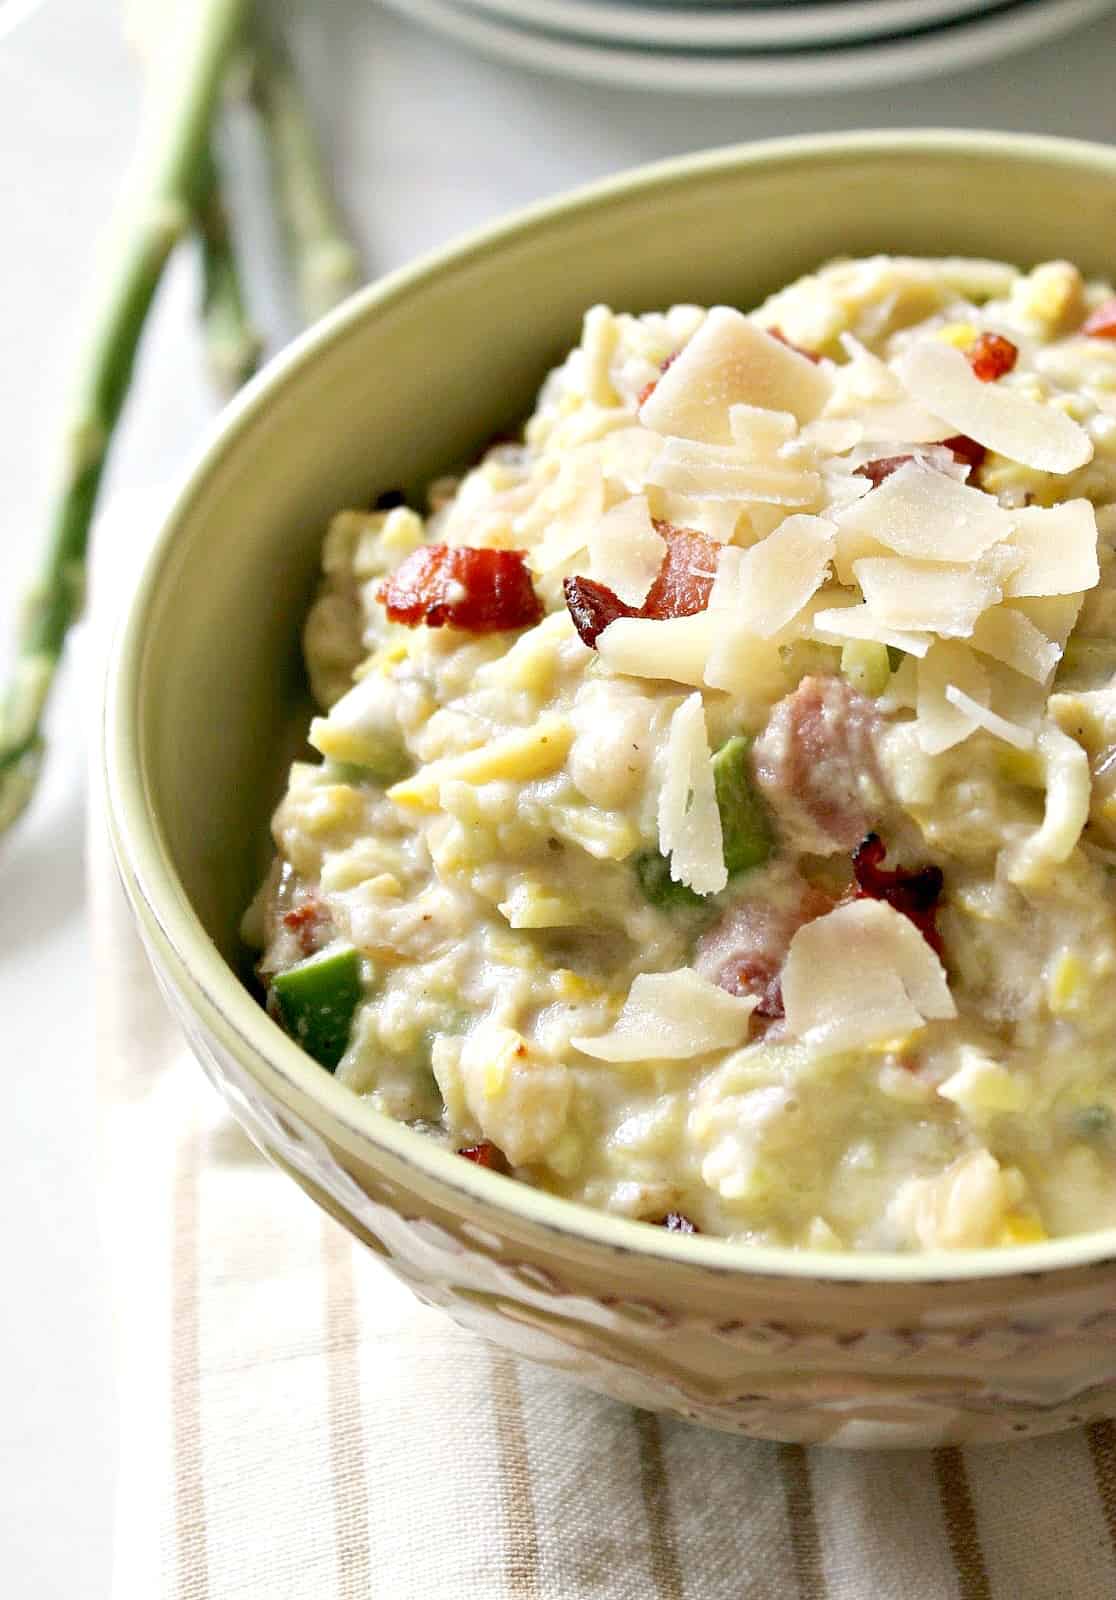 Bacon & Asparagus "Risotto"! This may be "faux-sotto", but the flavor is REAL in this vegetable risotto -- made with spiralized summer squash and a creamy caulflower cheese sauce, this dish is loaded with veggies and springtime flavors that will keep you coming back for more. 